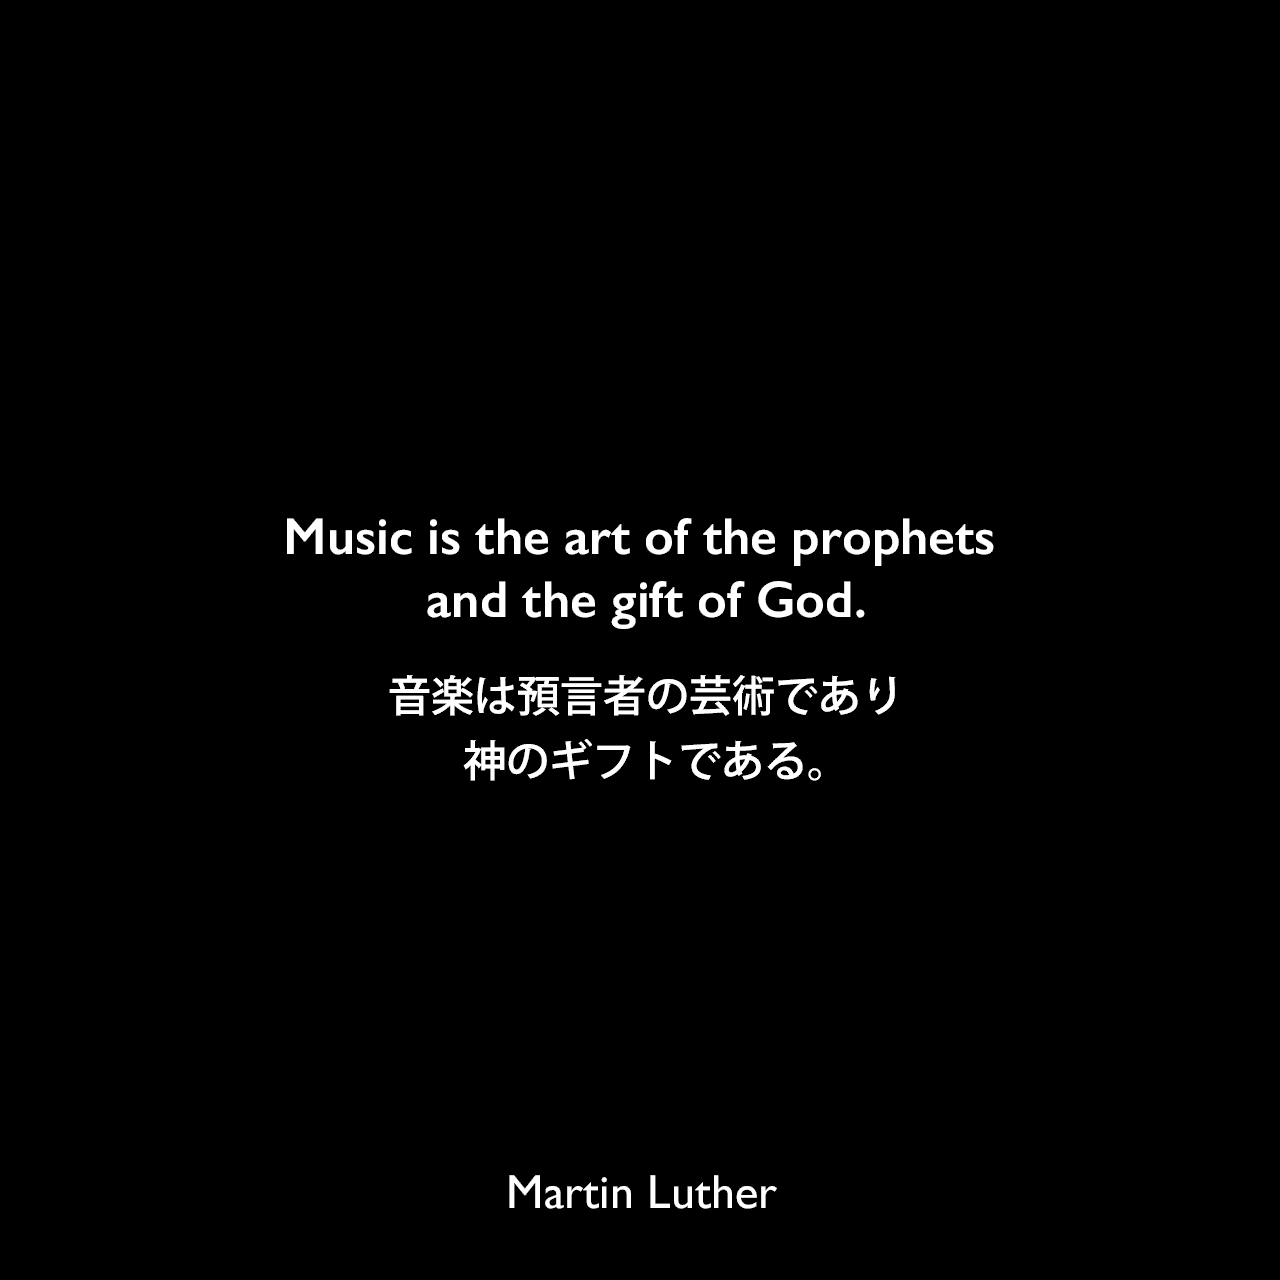 Music is the art of the prophets and the gift of God.音楽は預言者の芸術であり、神のギフトである。Martin Luther